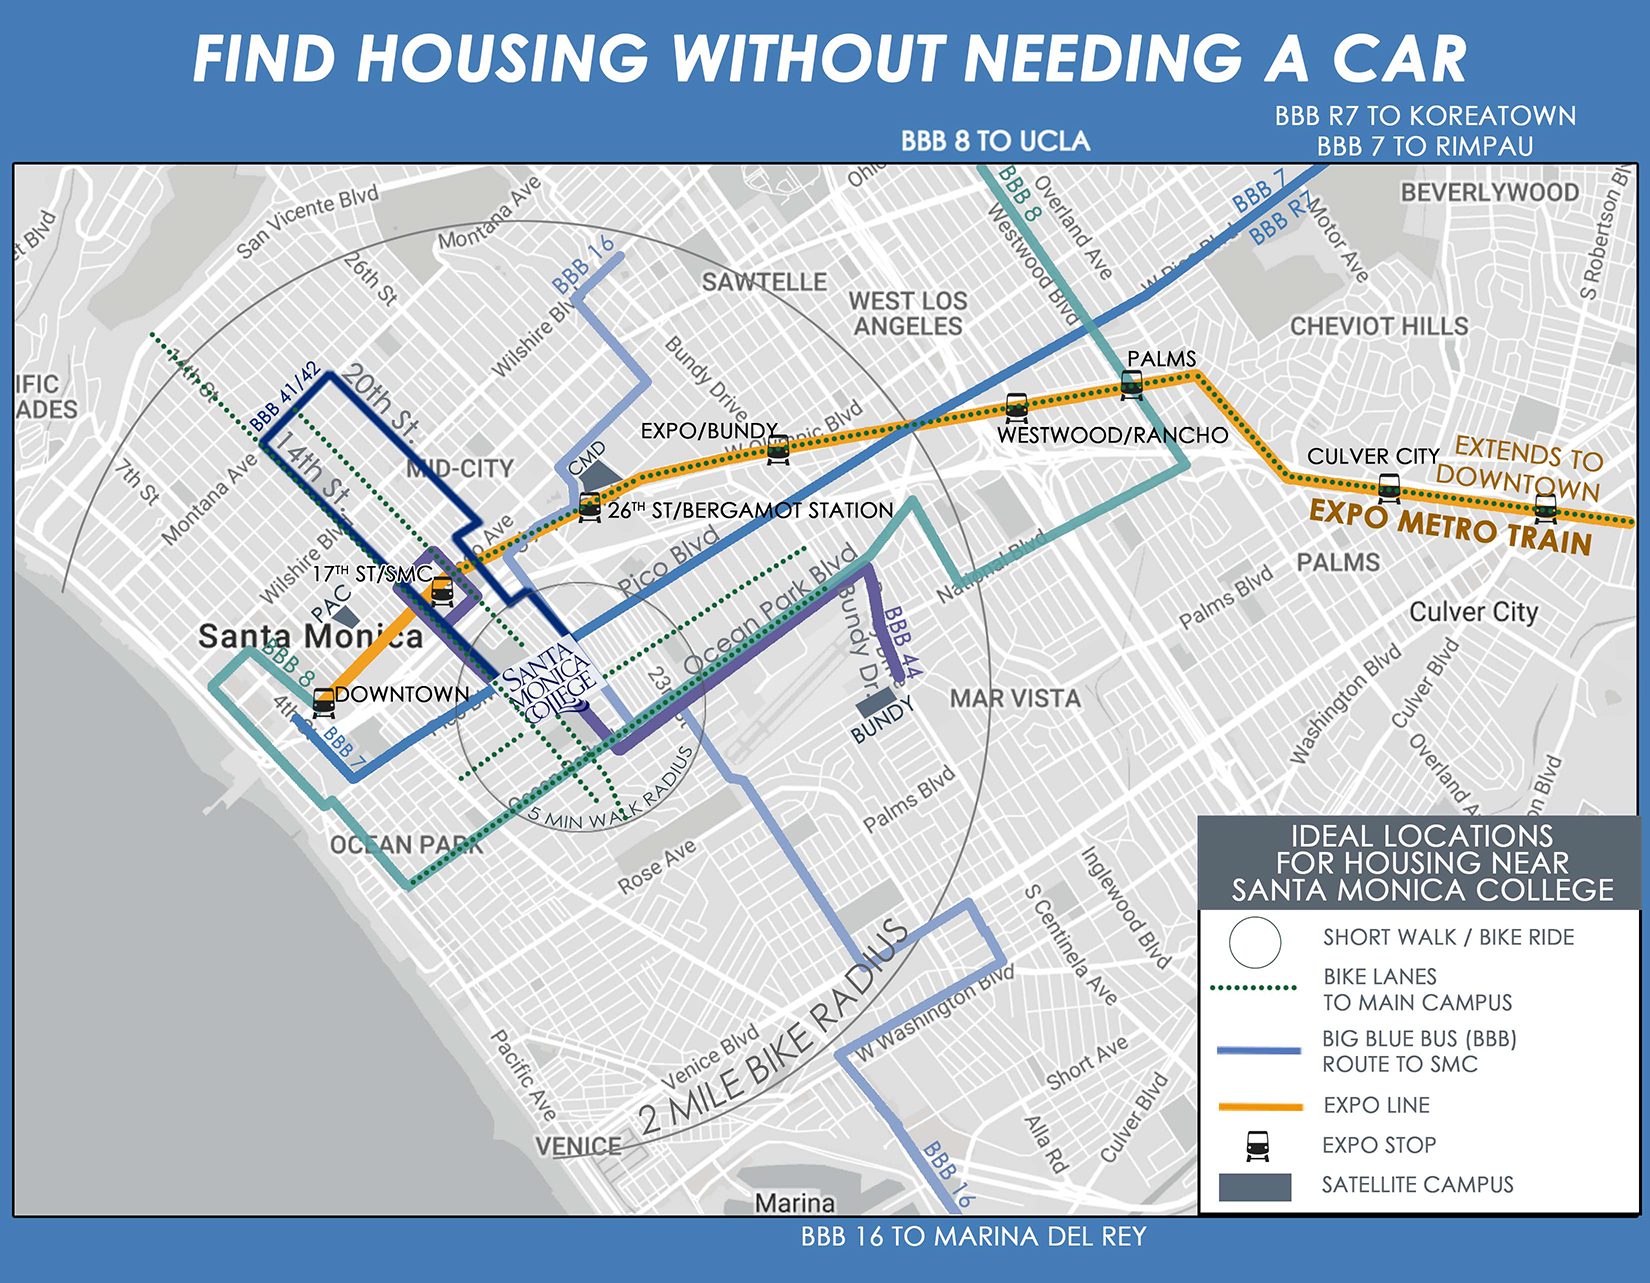 Housing Search Radius - Finding Housing without Needing a Car